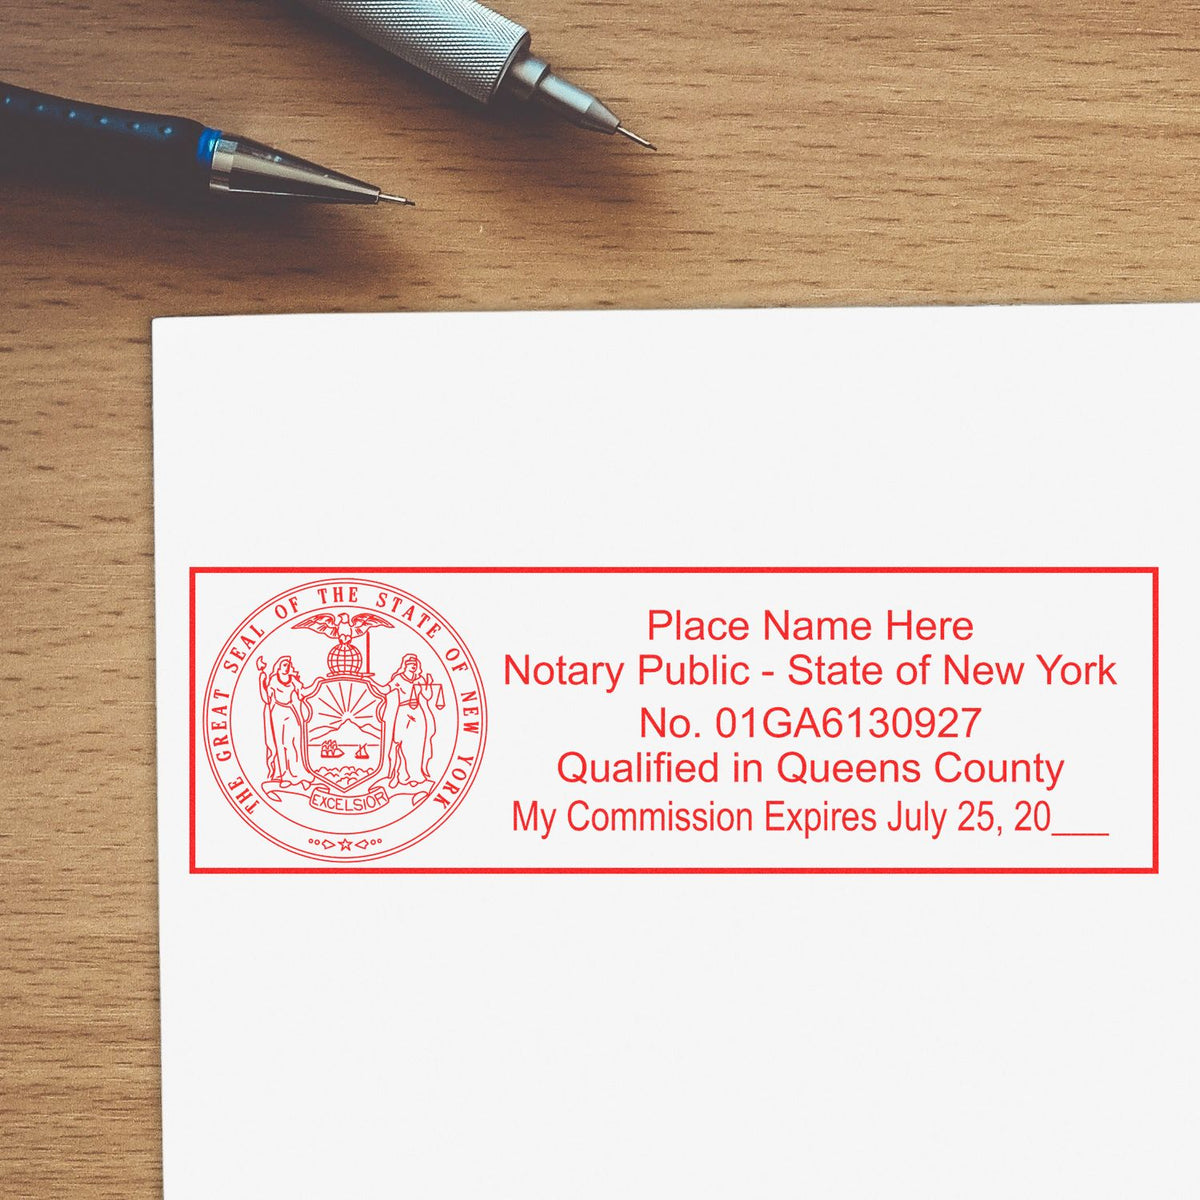 An alternative view of the MaxLight Premium Pre-Inked New York State Seal Notarial Stamp stamped on a sheet of paper showing the image in use